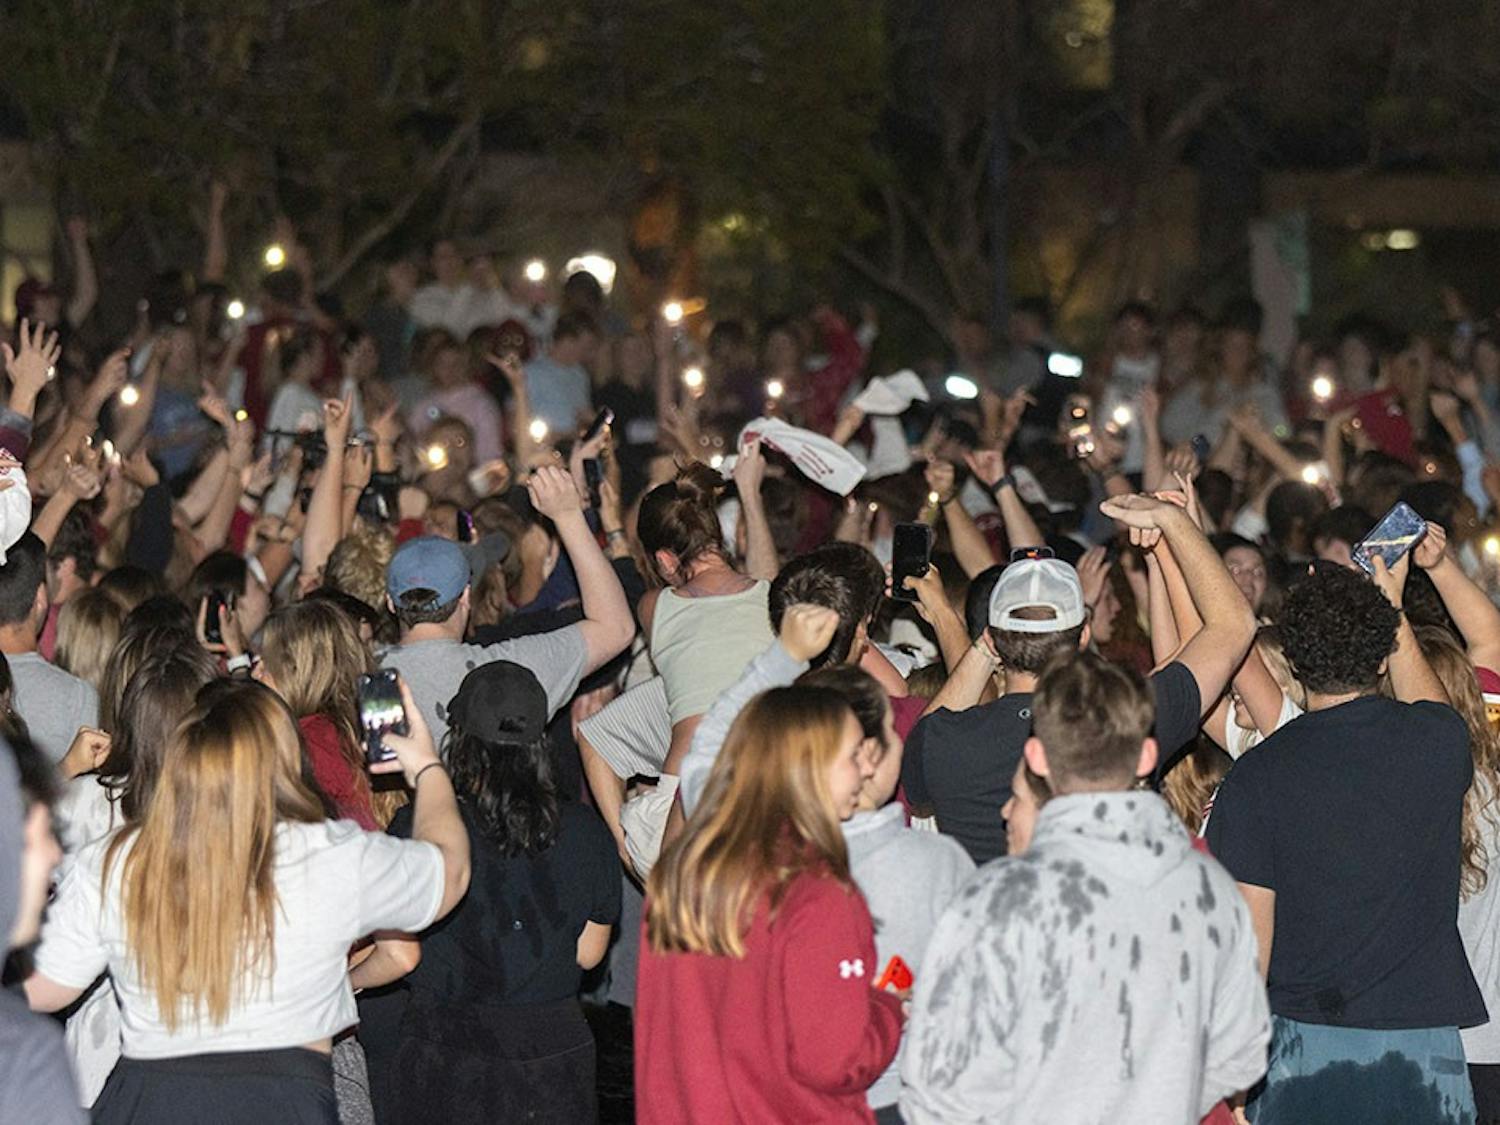 The sea of Gamecocks fans in the reflection pond waving their rally towels in front of Thomas Cooper Library. This follows the women's basketball team winning the national championship on April 3, 2022 in Columbia, SC.&nbsp;